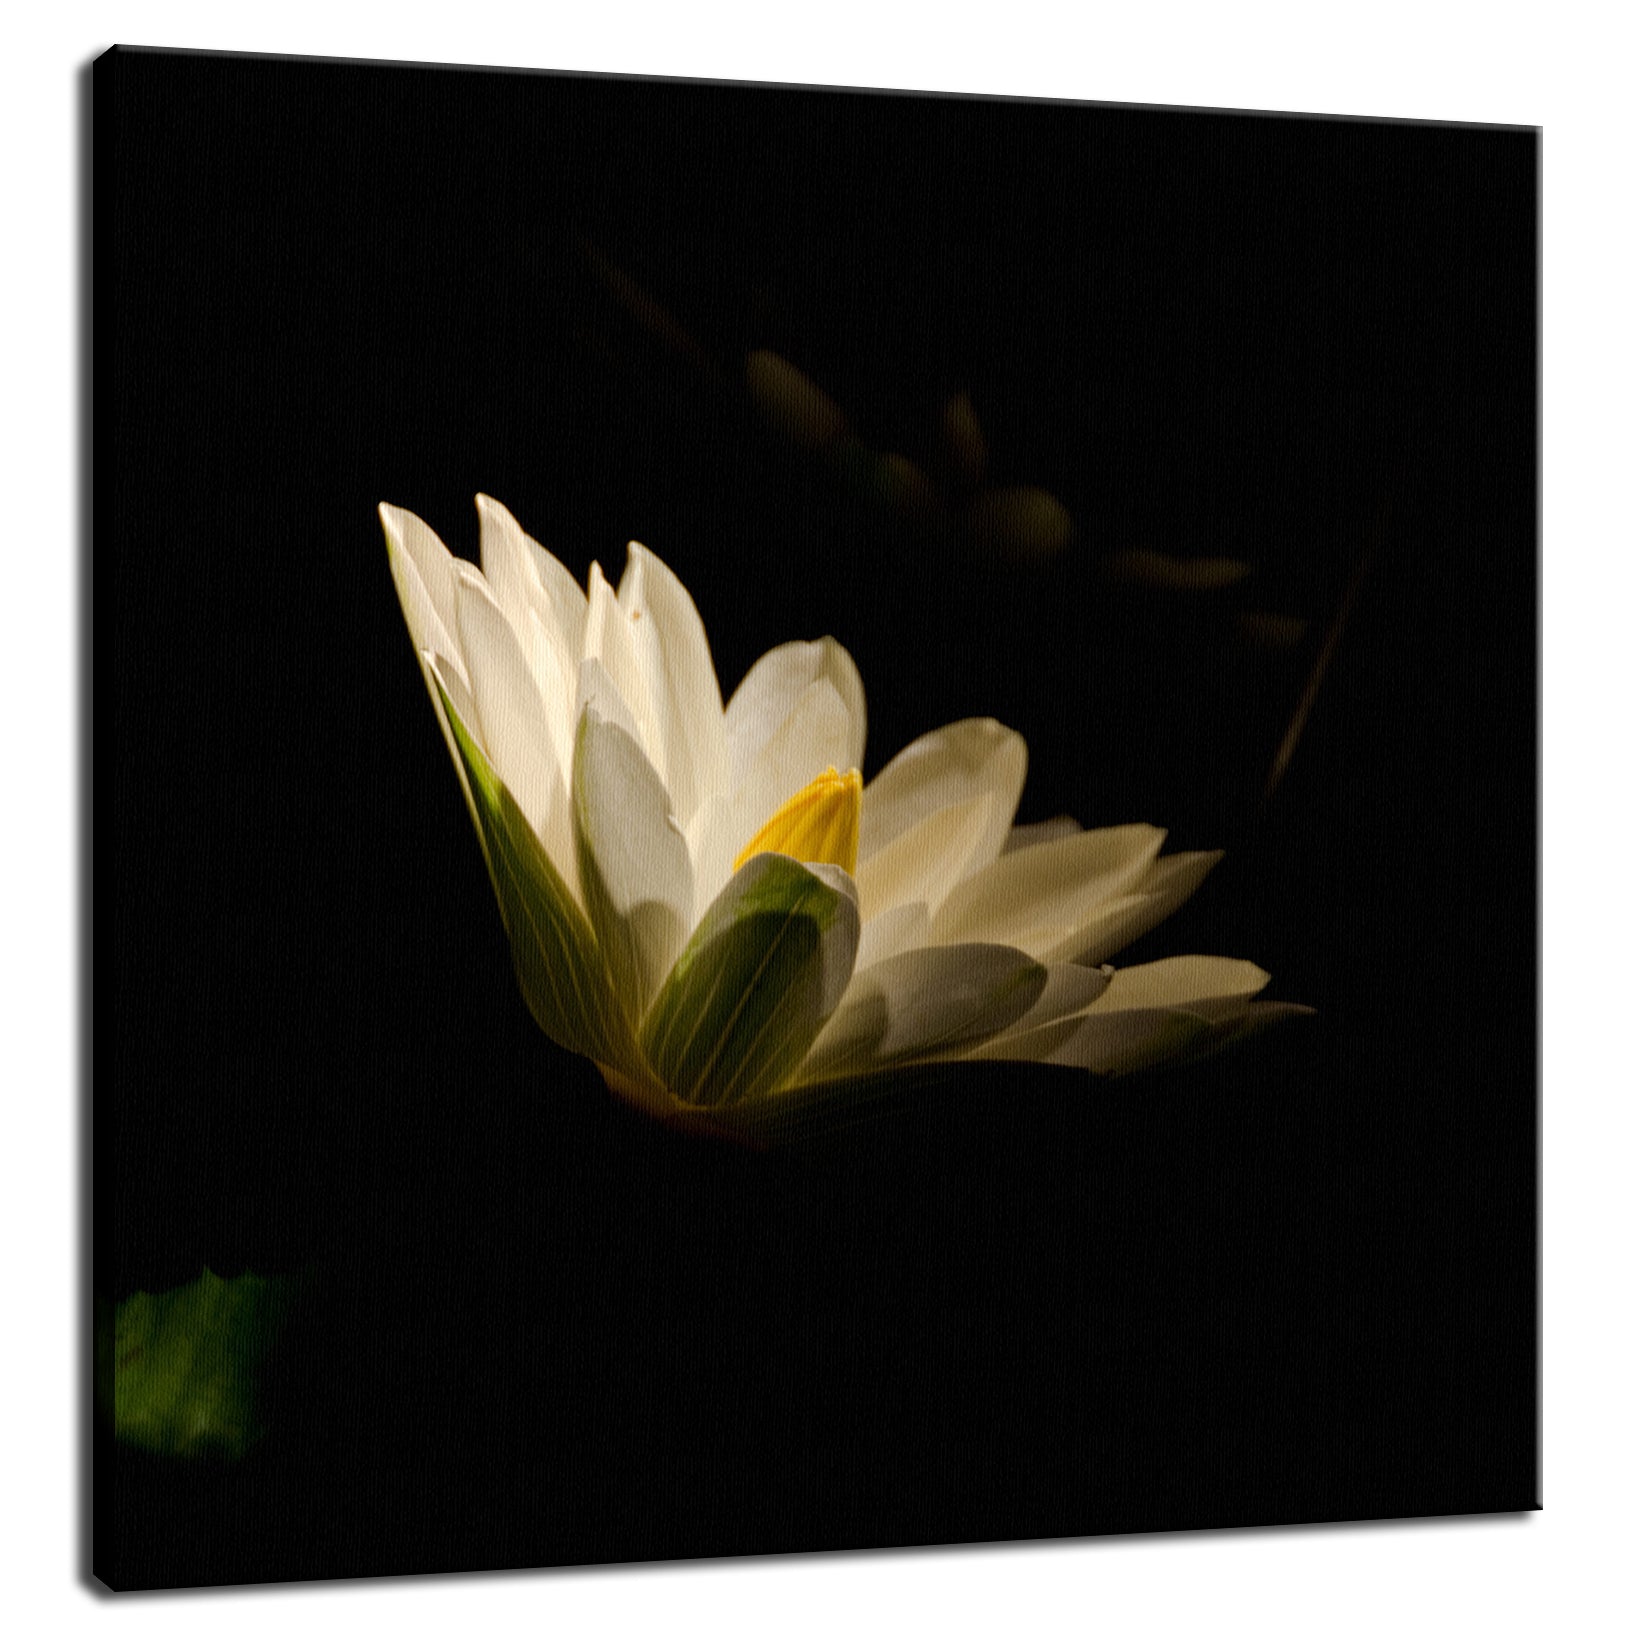 Spotlight on Waterlily - Square Nature / Floral Photo Fine Art & Unframed Wall Art Prints  - PIPAFINEART